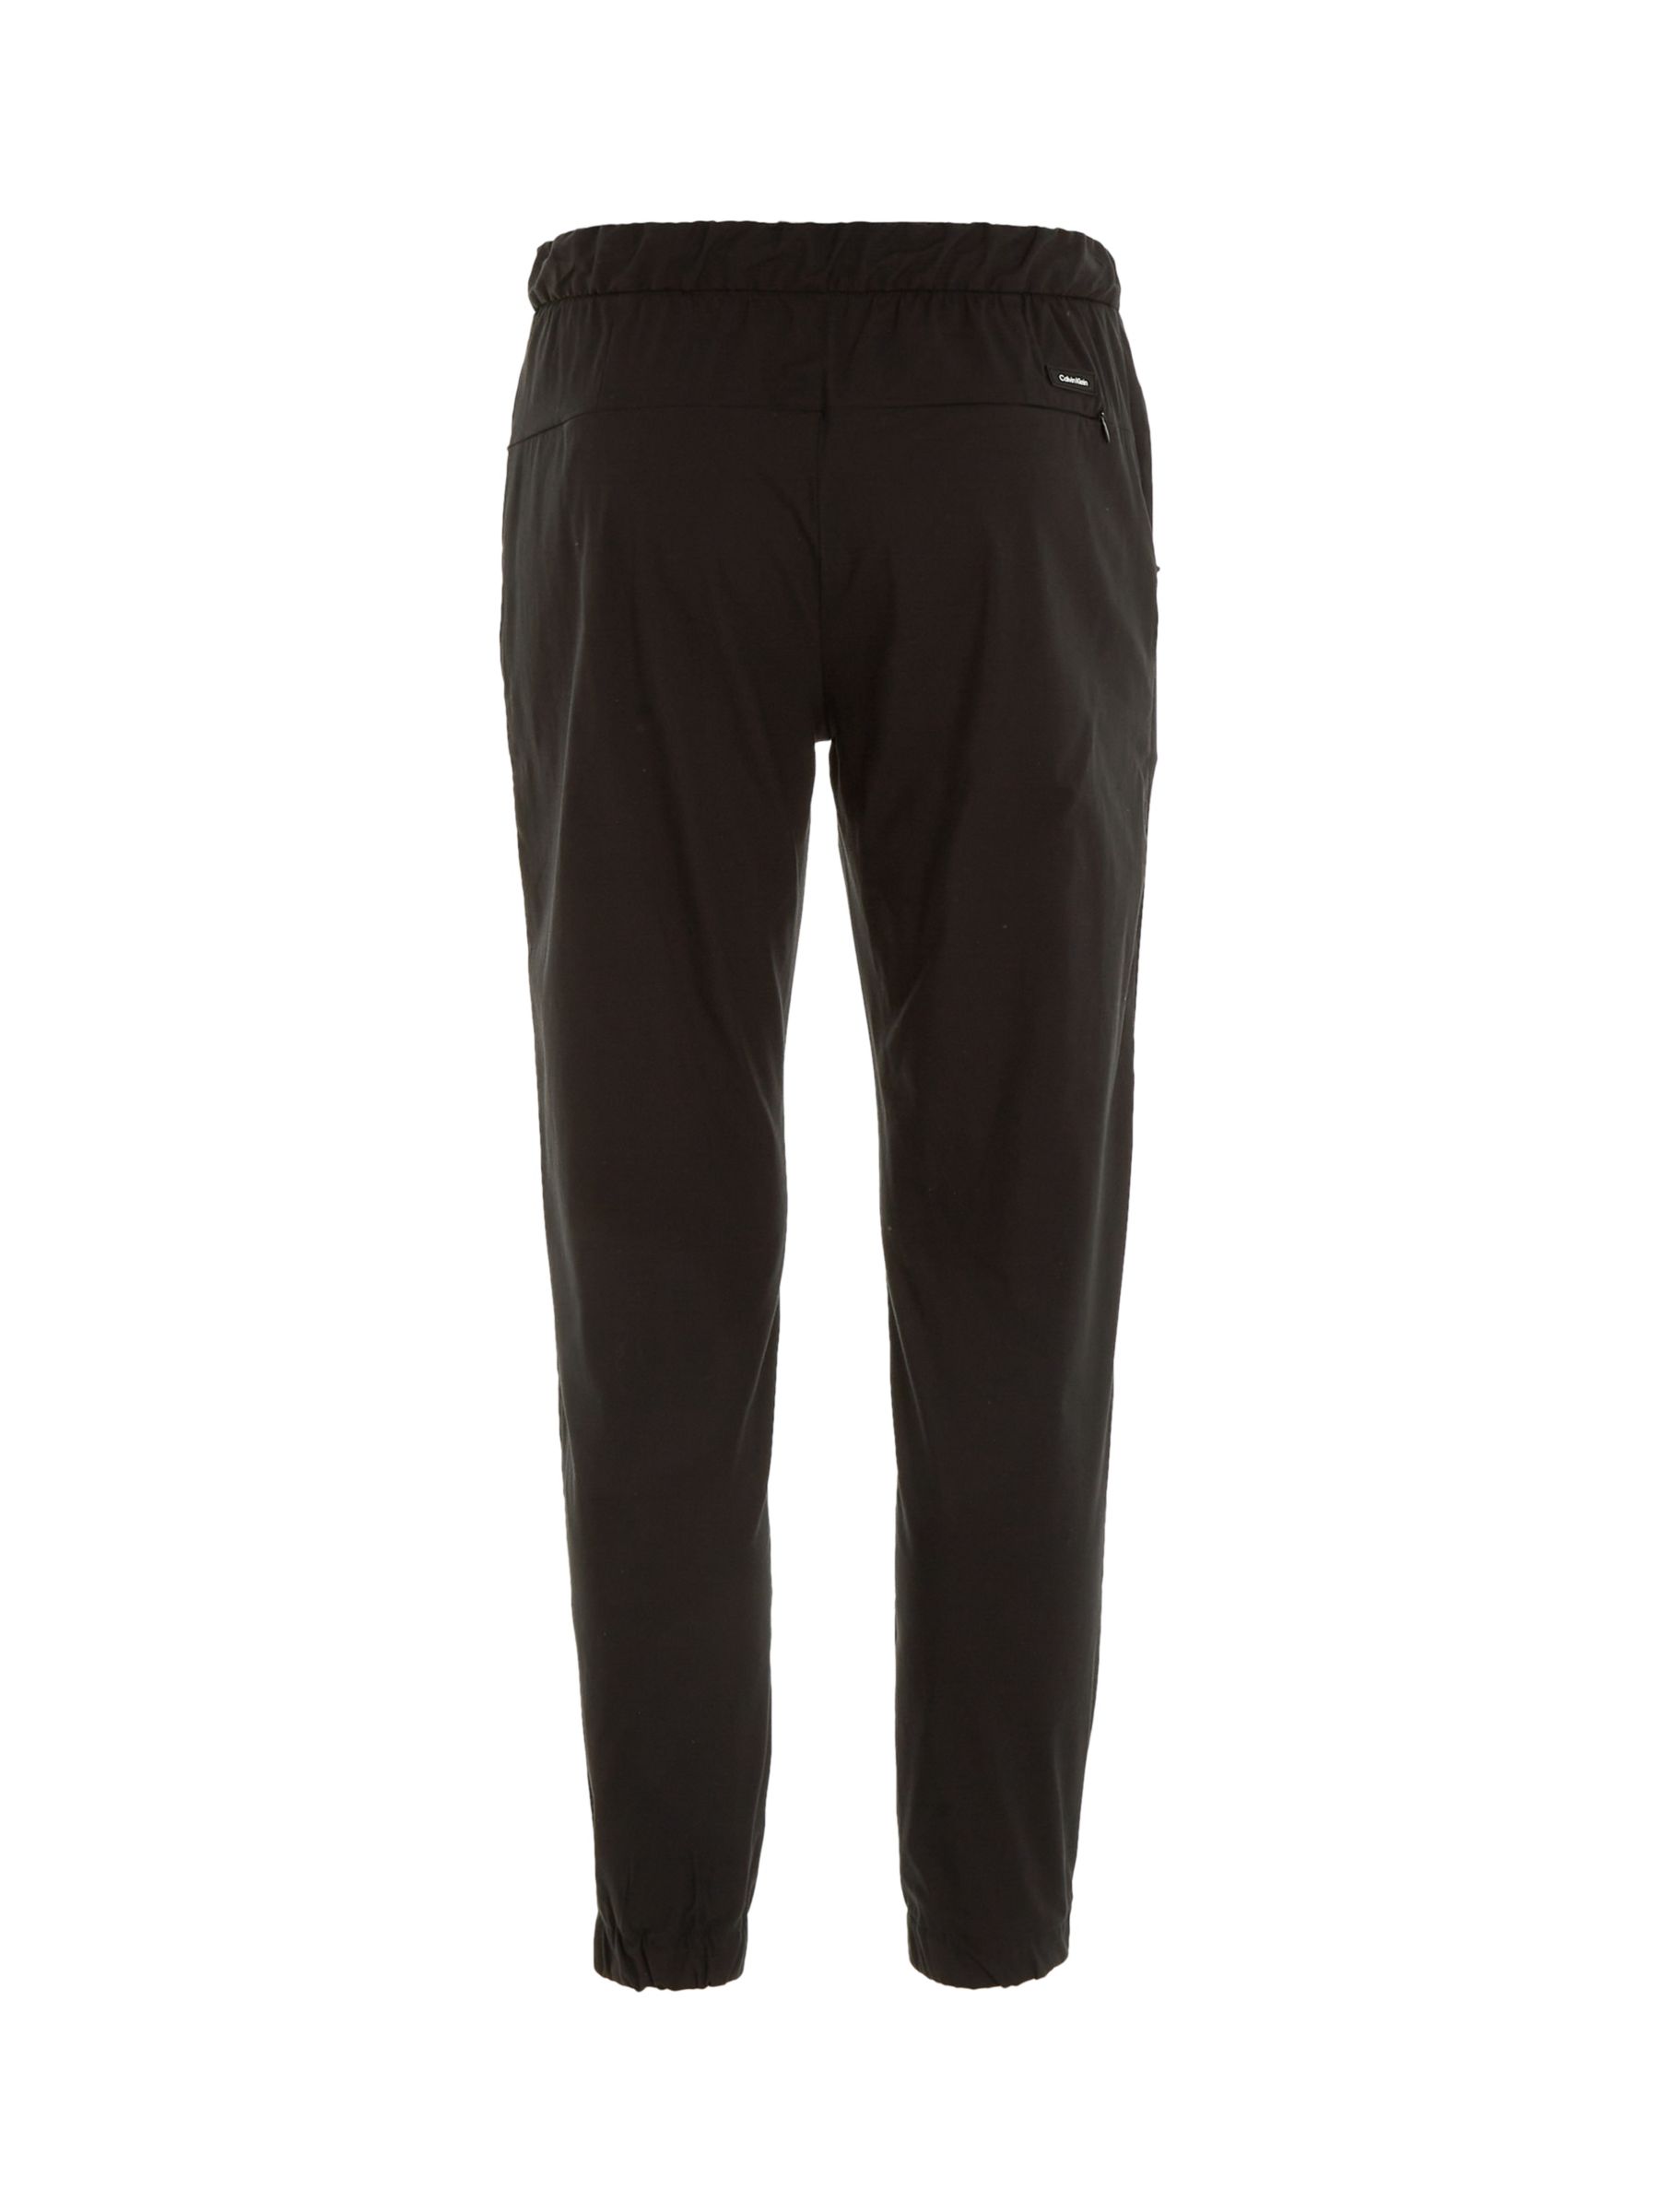 Calvin Klein Tapered Trousers, Black at John Lewis & Partners